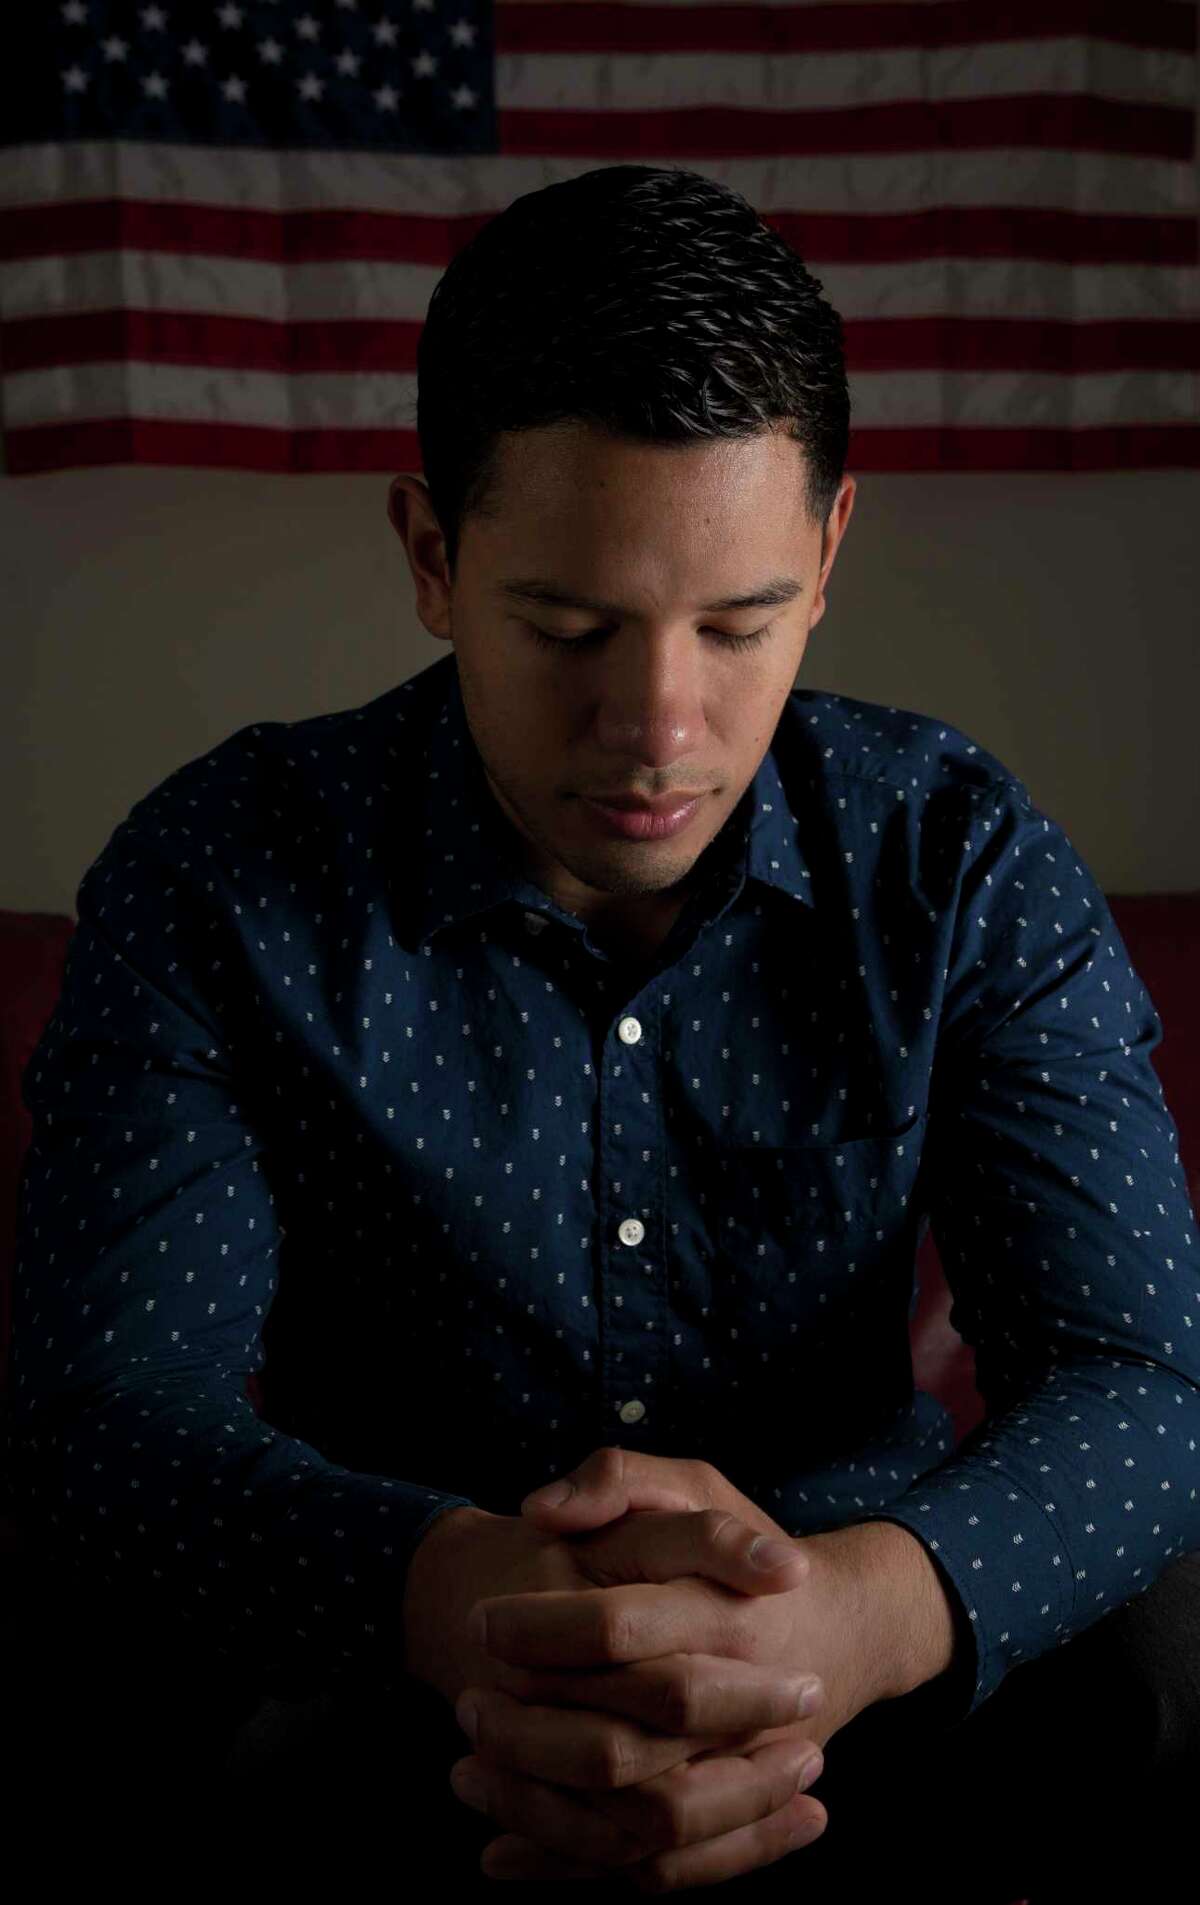 Jesus Contreras, a Deferred Action for Childhood Arrivals recipient, poses for a photograph inside his home Tuesday, Oct. 17, 2017, in Houston. Contreras is a paramedic for the Montgomery County Health Department and worked long hours during Tropical Storm Harvey. ( Godofredo A. Vasquez / Houston Chronicle )